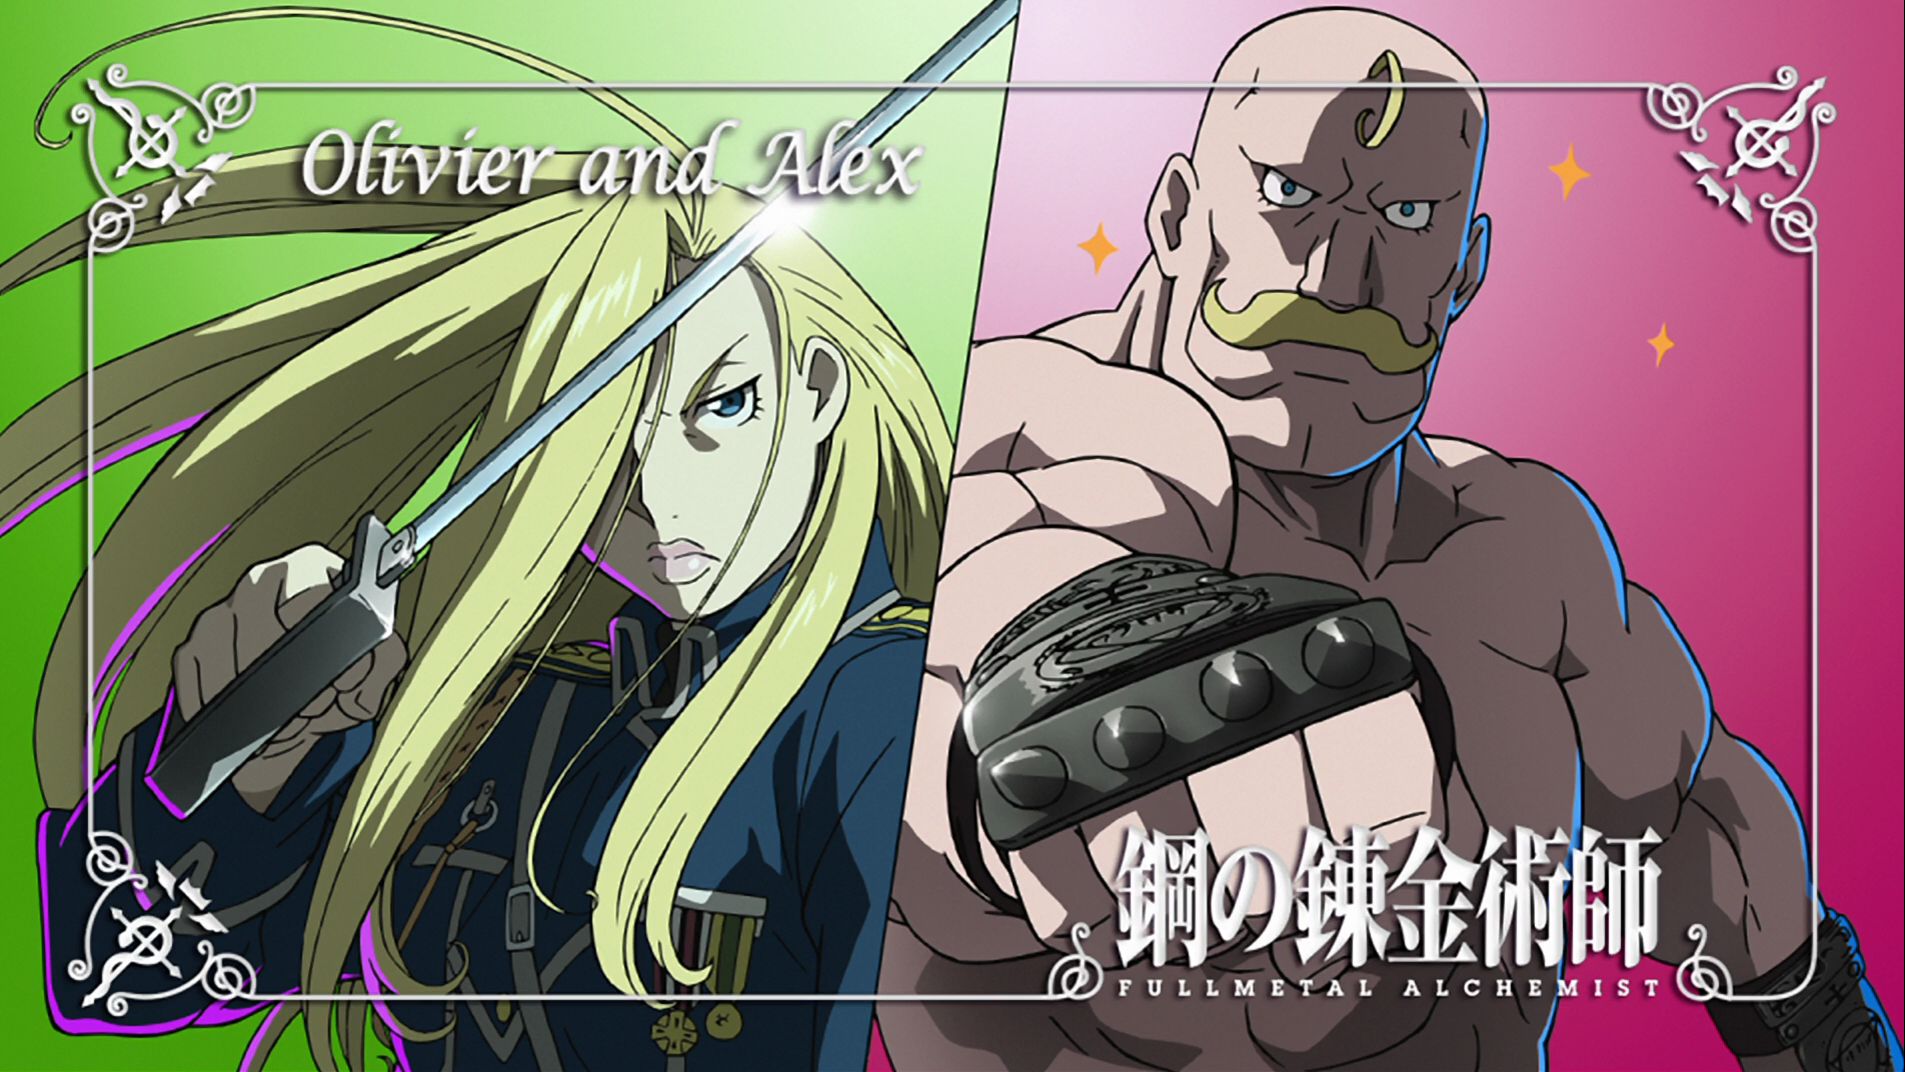 Pin by mira mira on olivier mira armstrong | Fullmetal alchemist, Fullmetal  alchemist edward, Alchemist